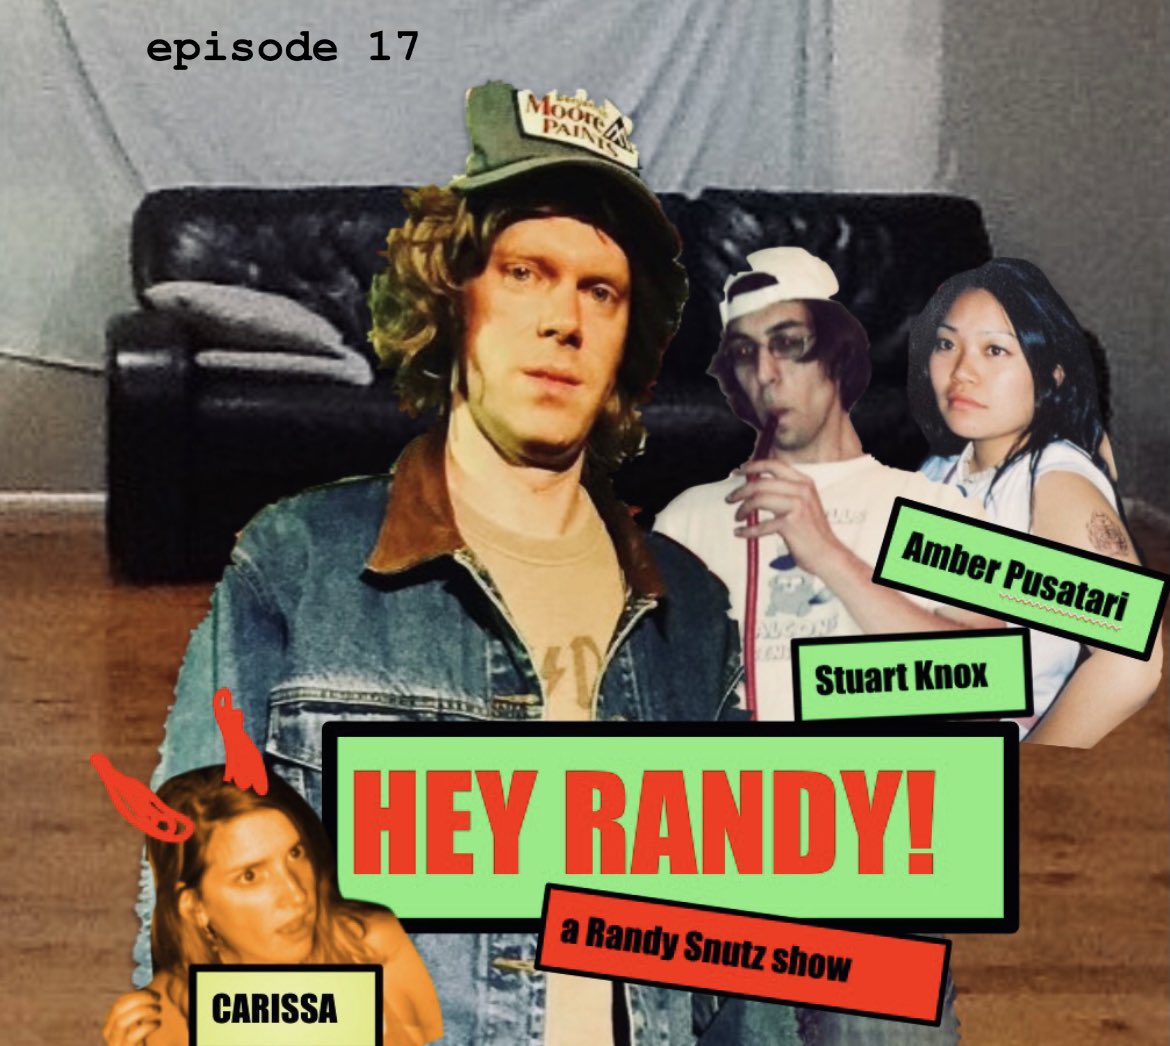 Attention friends (and enemies) of the HEY RANDY! podcast: a new episode is out today on @ComedyBangBang The phone line is open for your duplicitous tales, leave us a voicemail: 779-379-2679